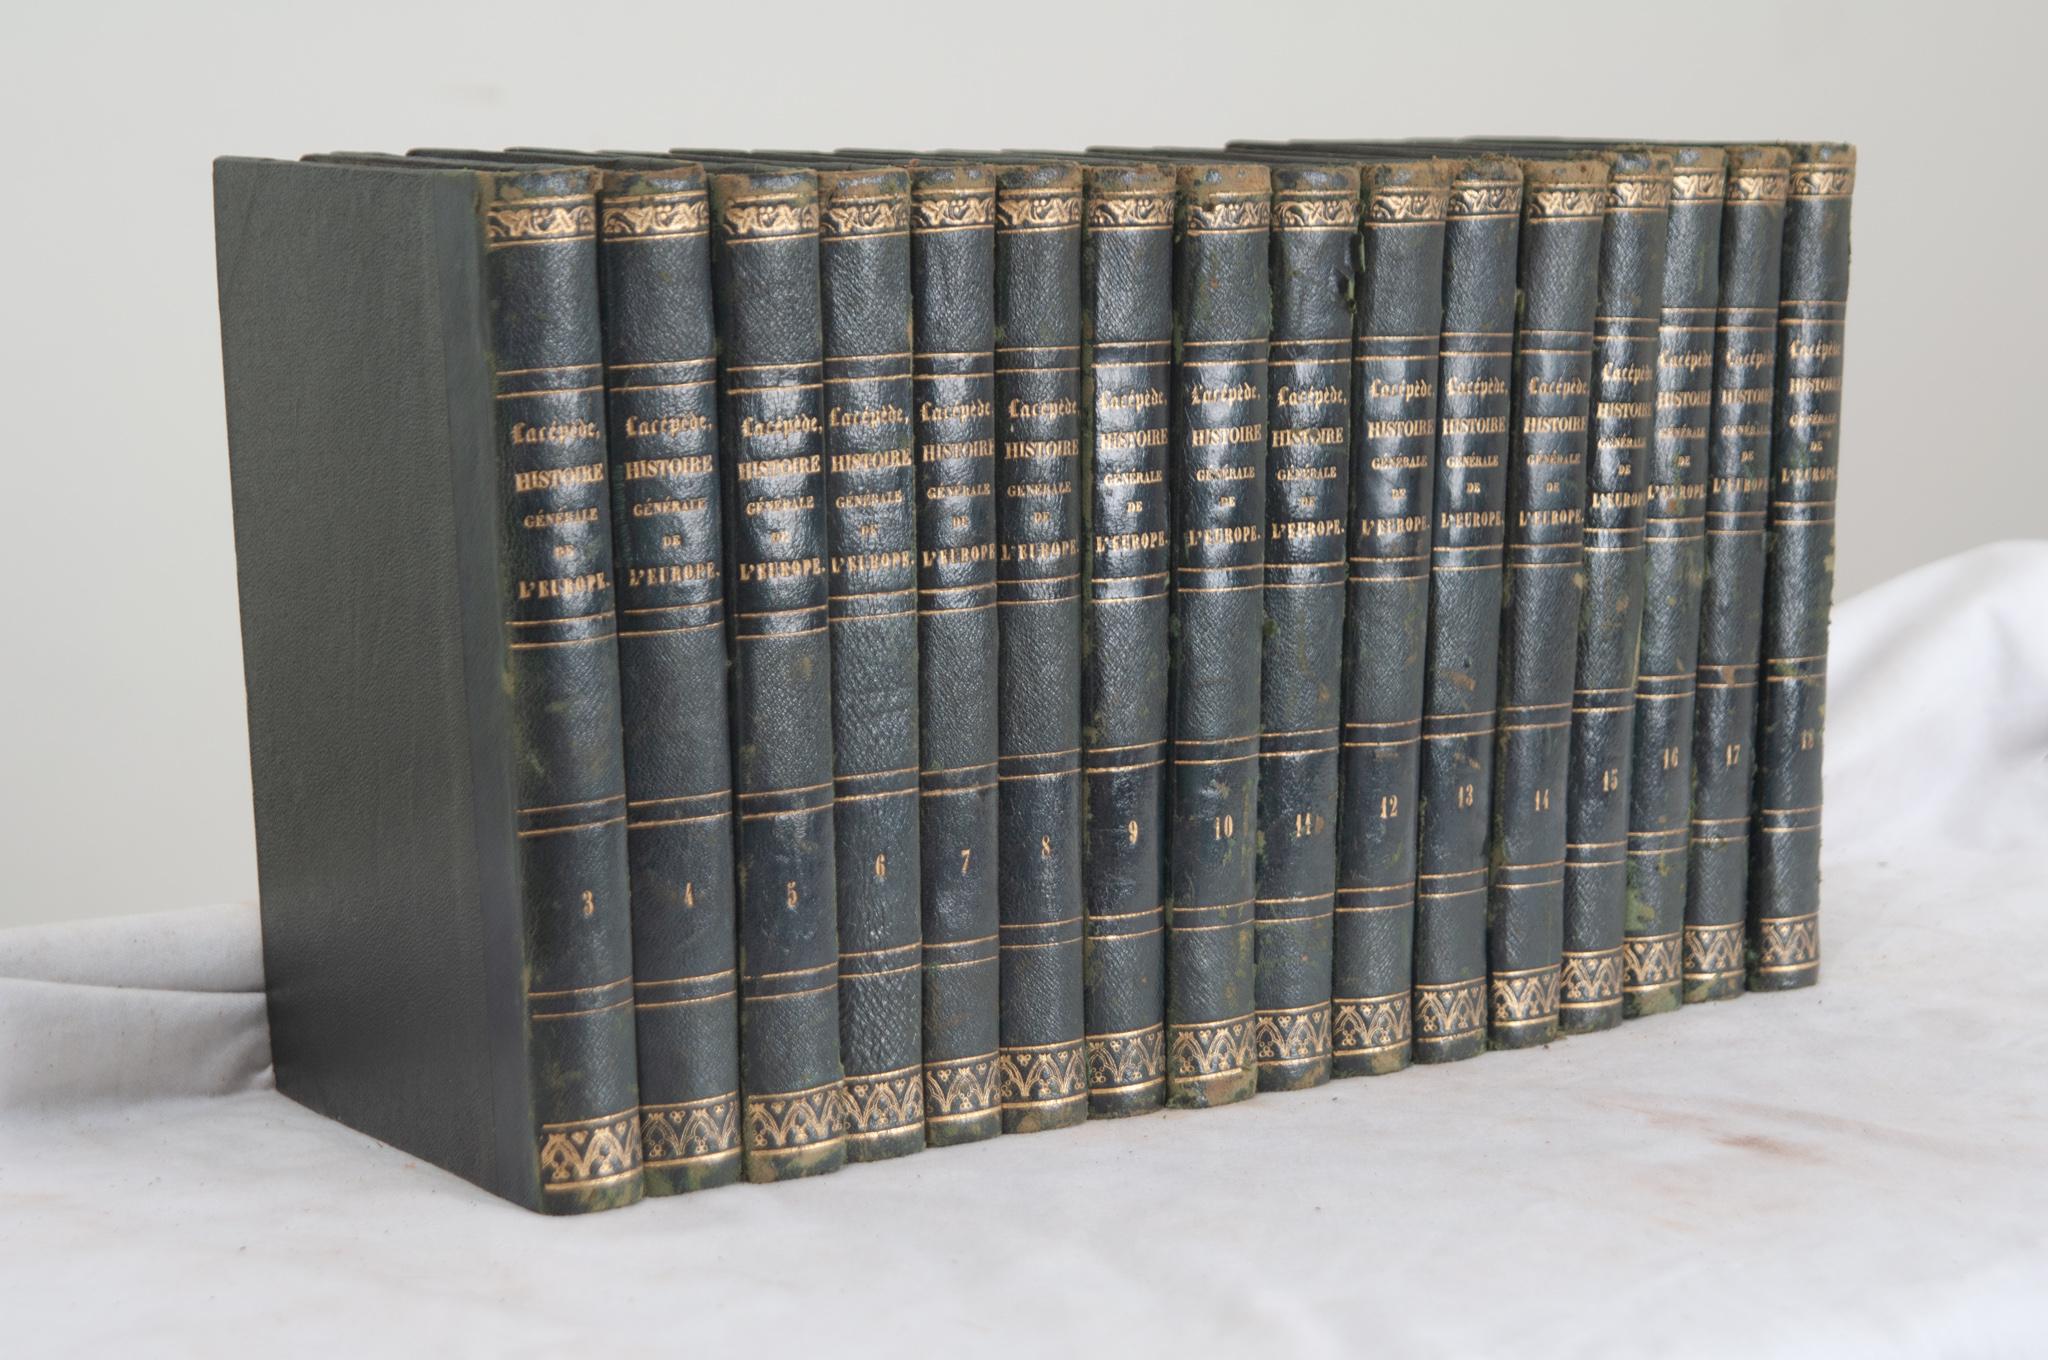 Hand-Crafted Set of 16 French History Books by M. LeCount de Lacépede